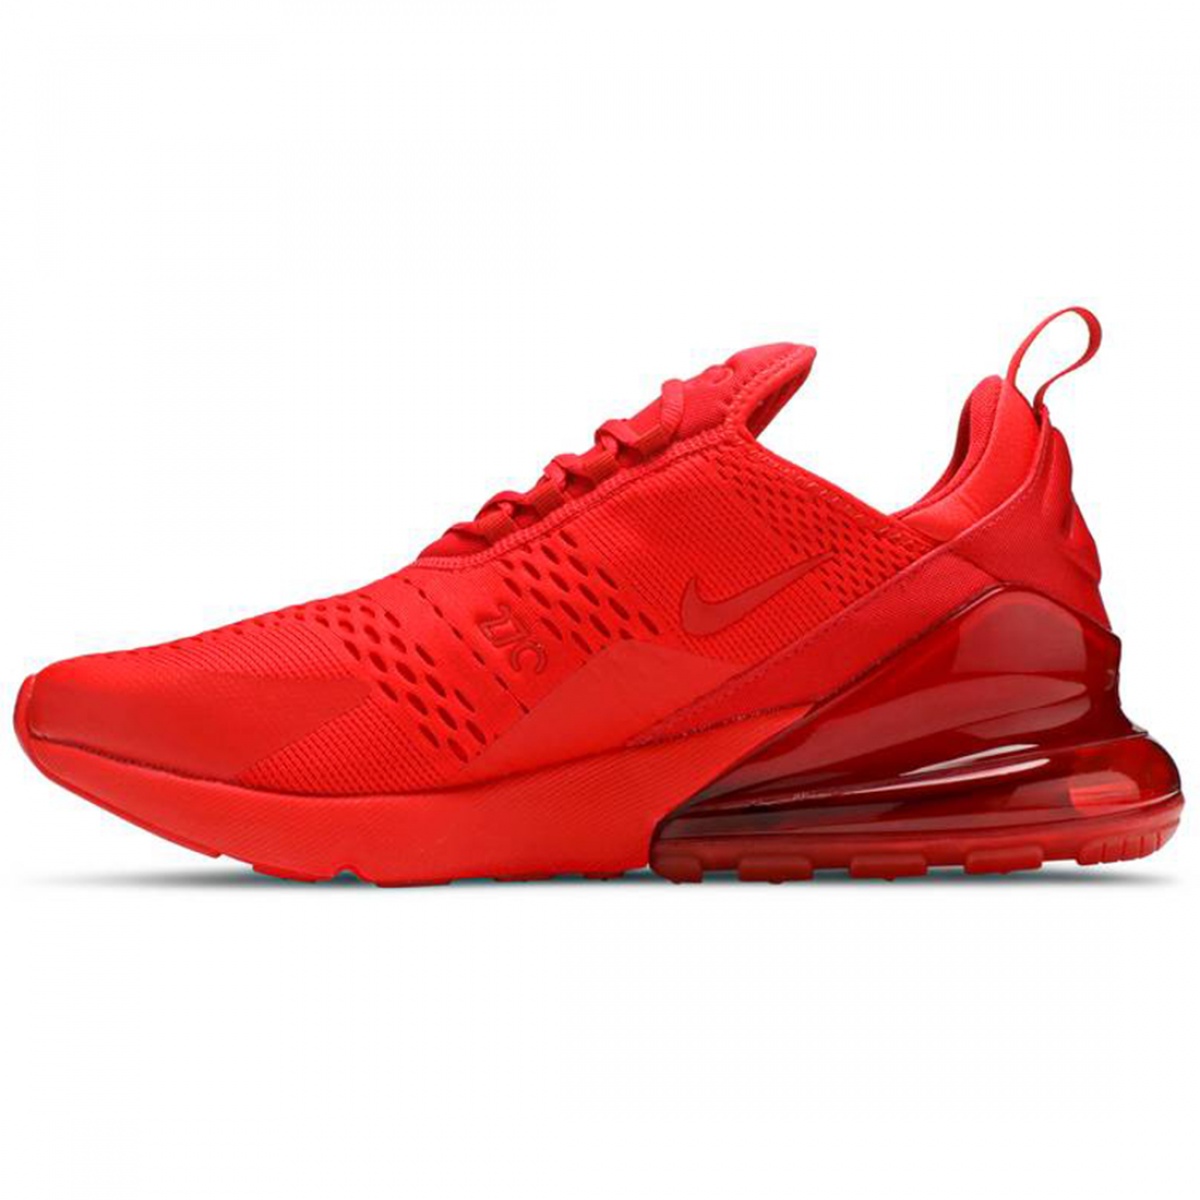 Sunburn easy to be hurt morale Air Max 270 Boasts Red nike shoes sport shoes Outlet – PK-Shoes